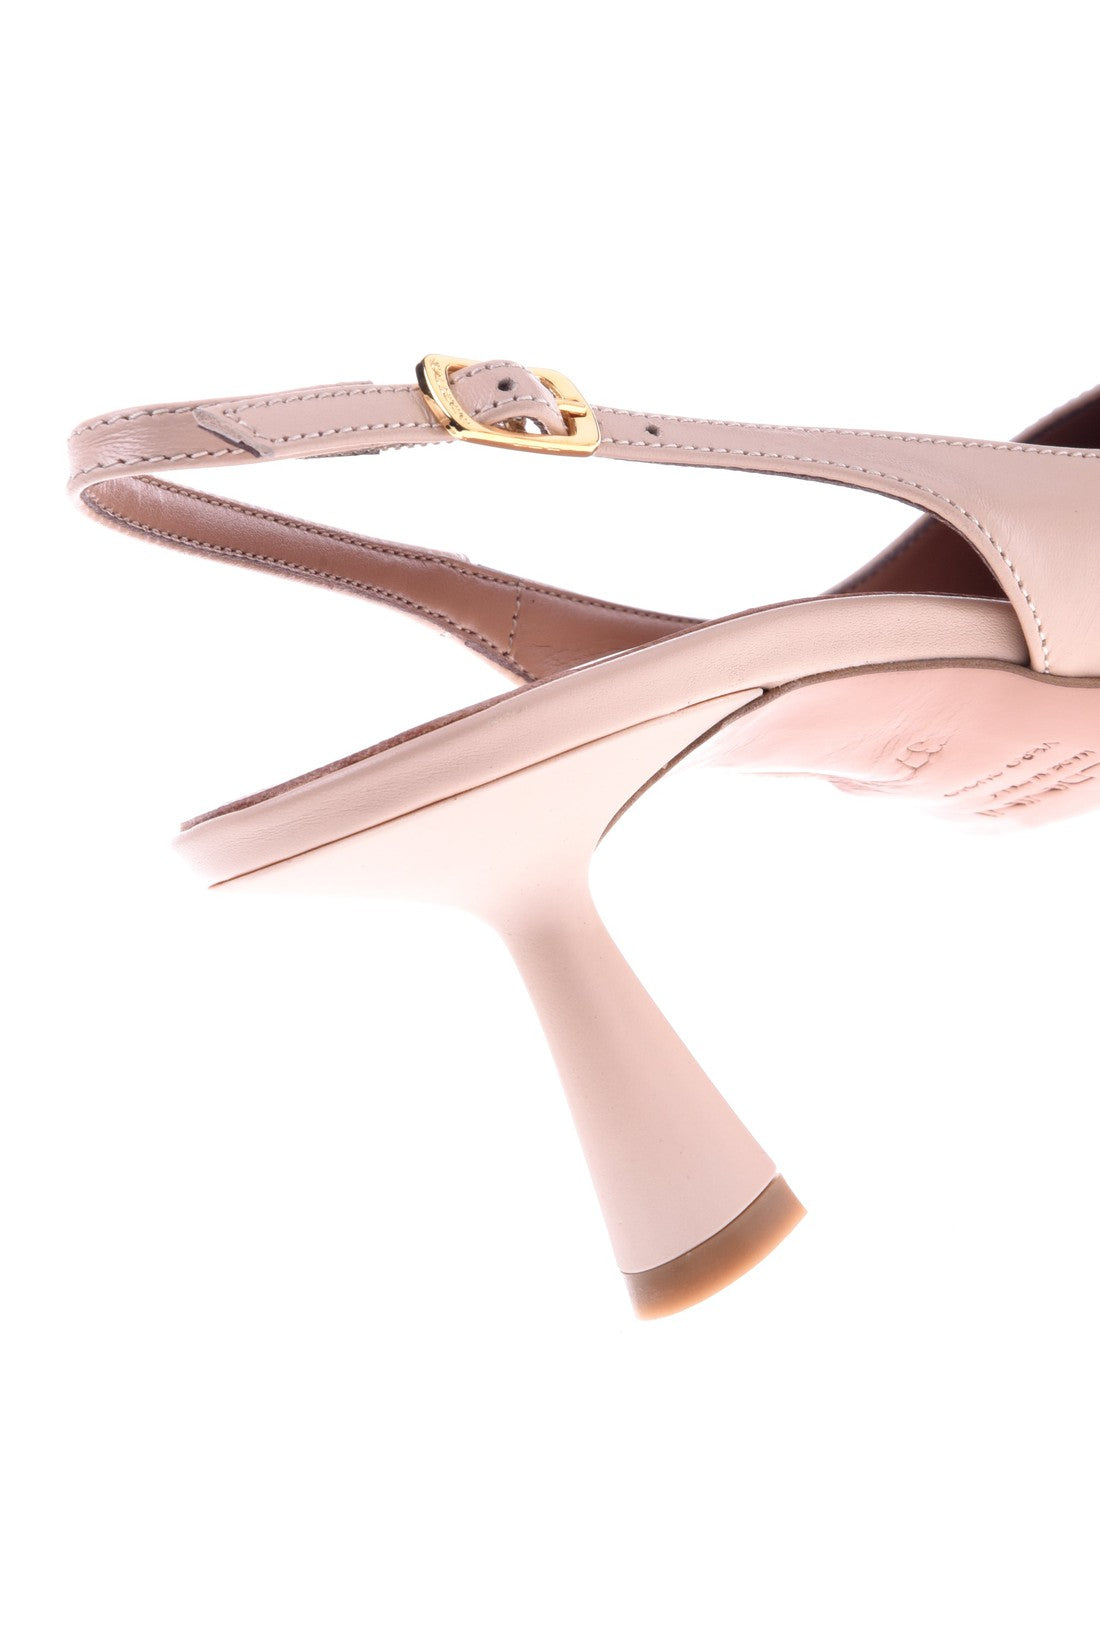 Slingbacks in taupe nappa leather